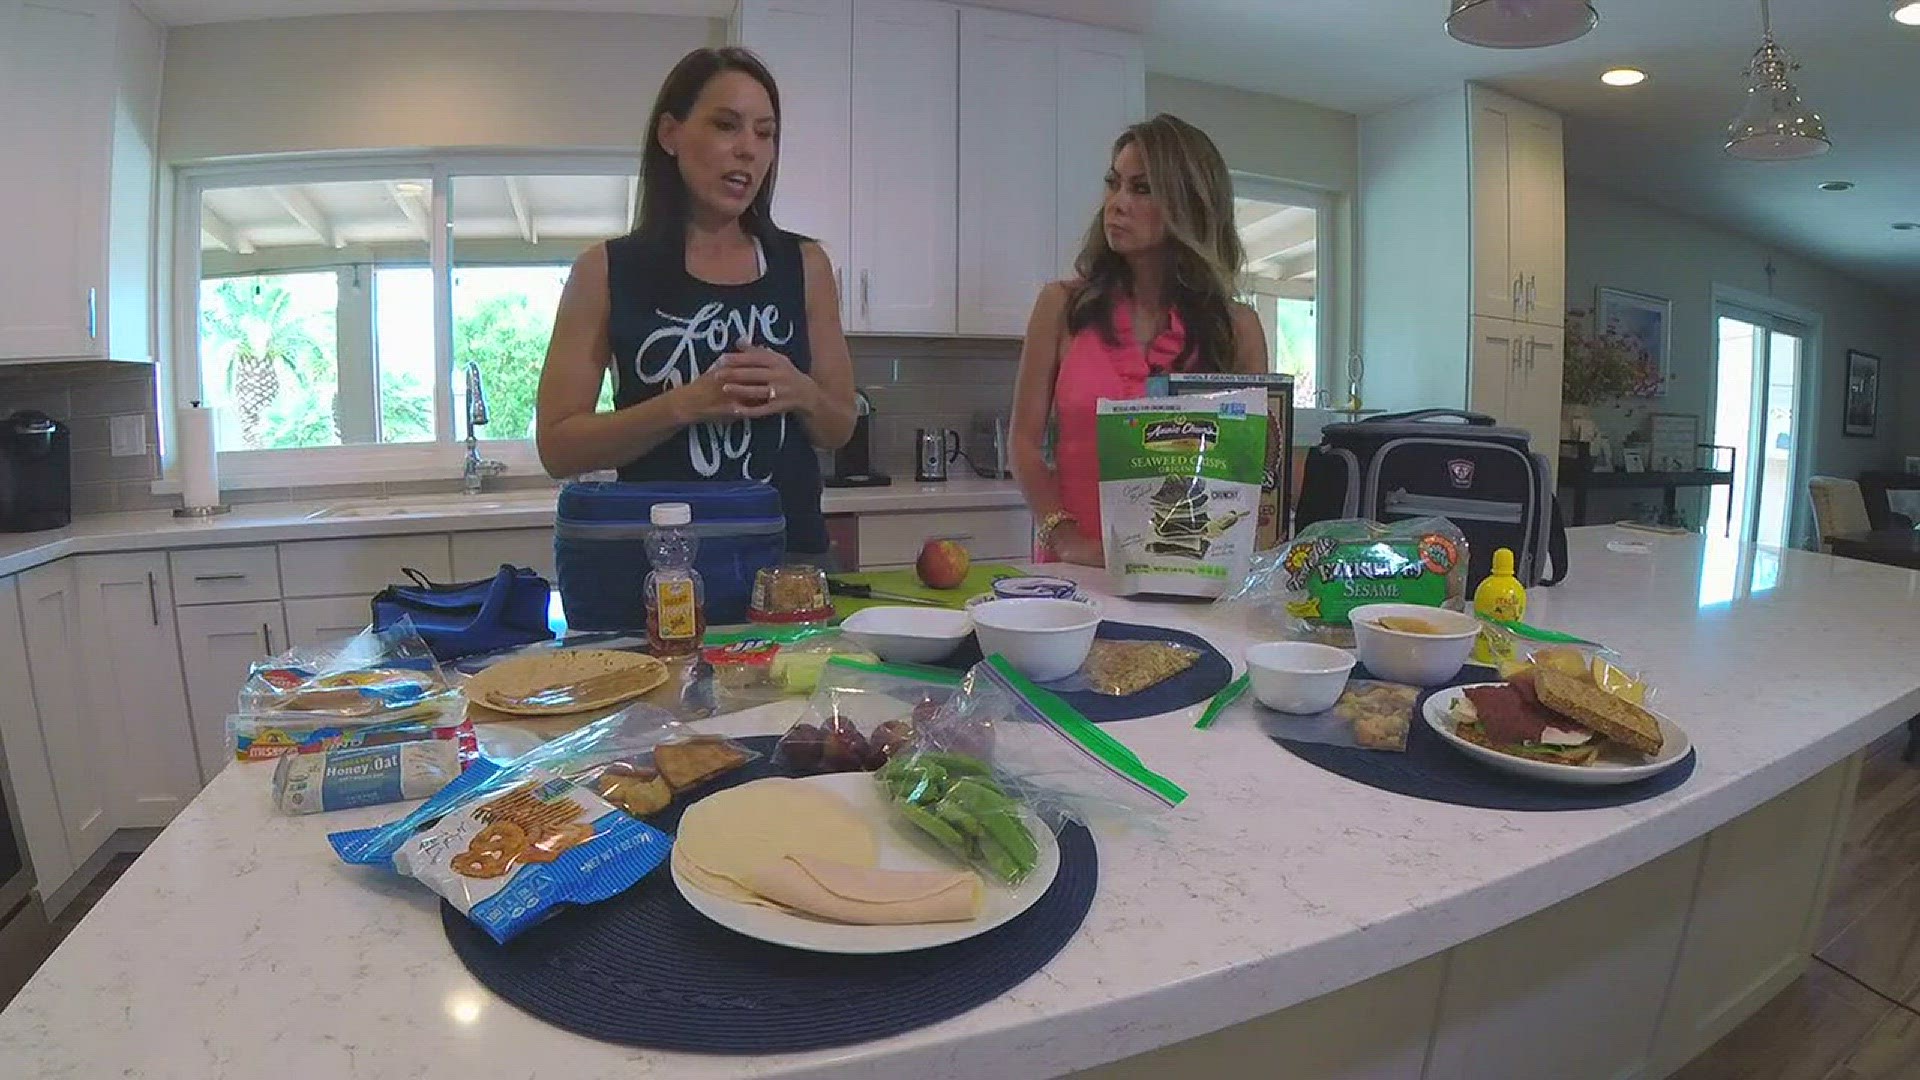 Kim Miller Fit Mom Diet shows us how to make some easy and healthy lunches for teenagers.